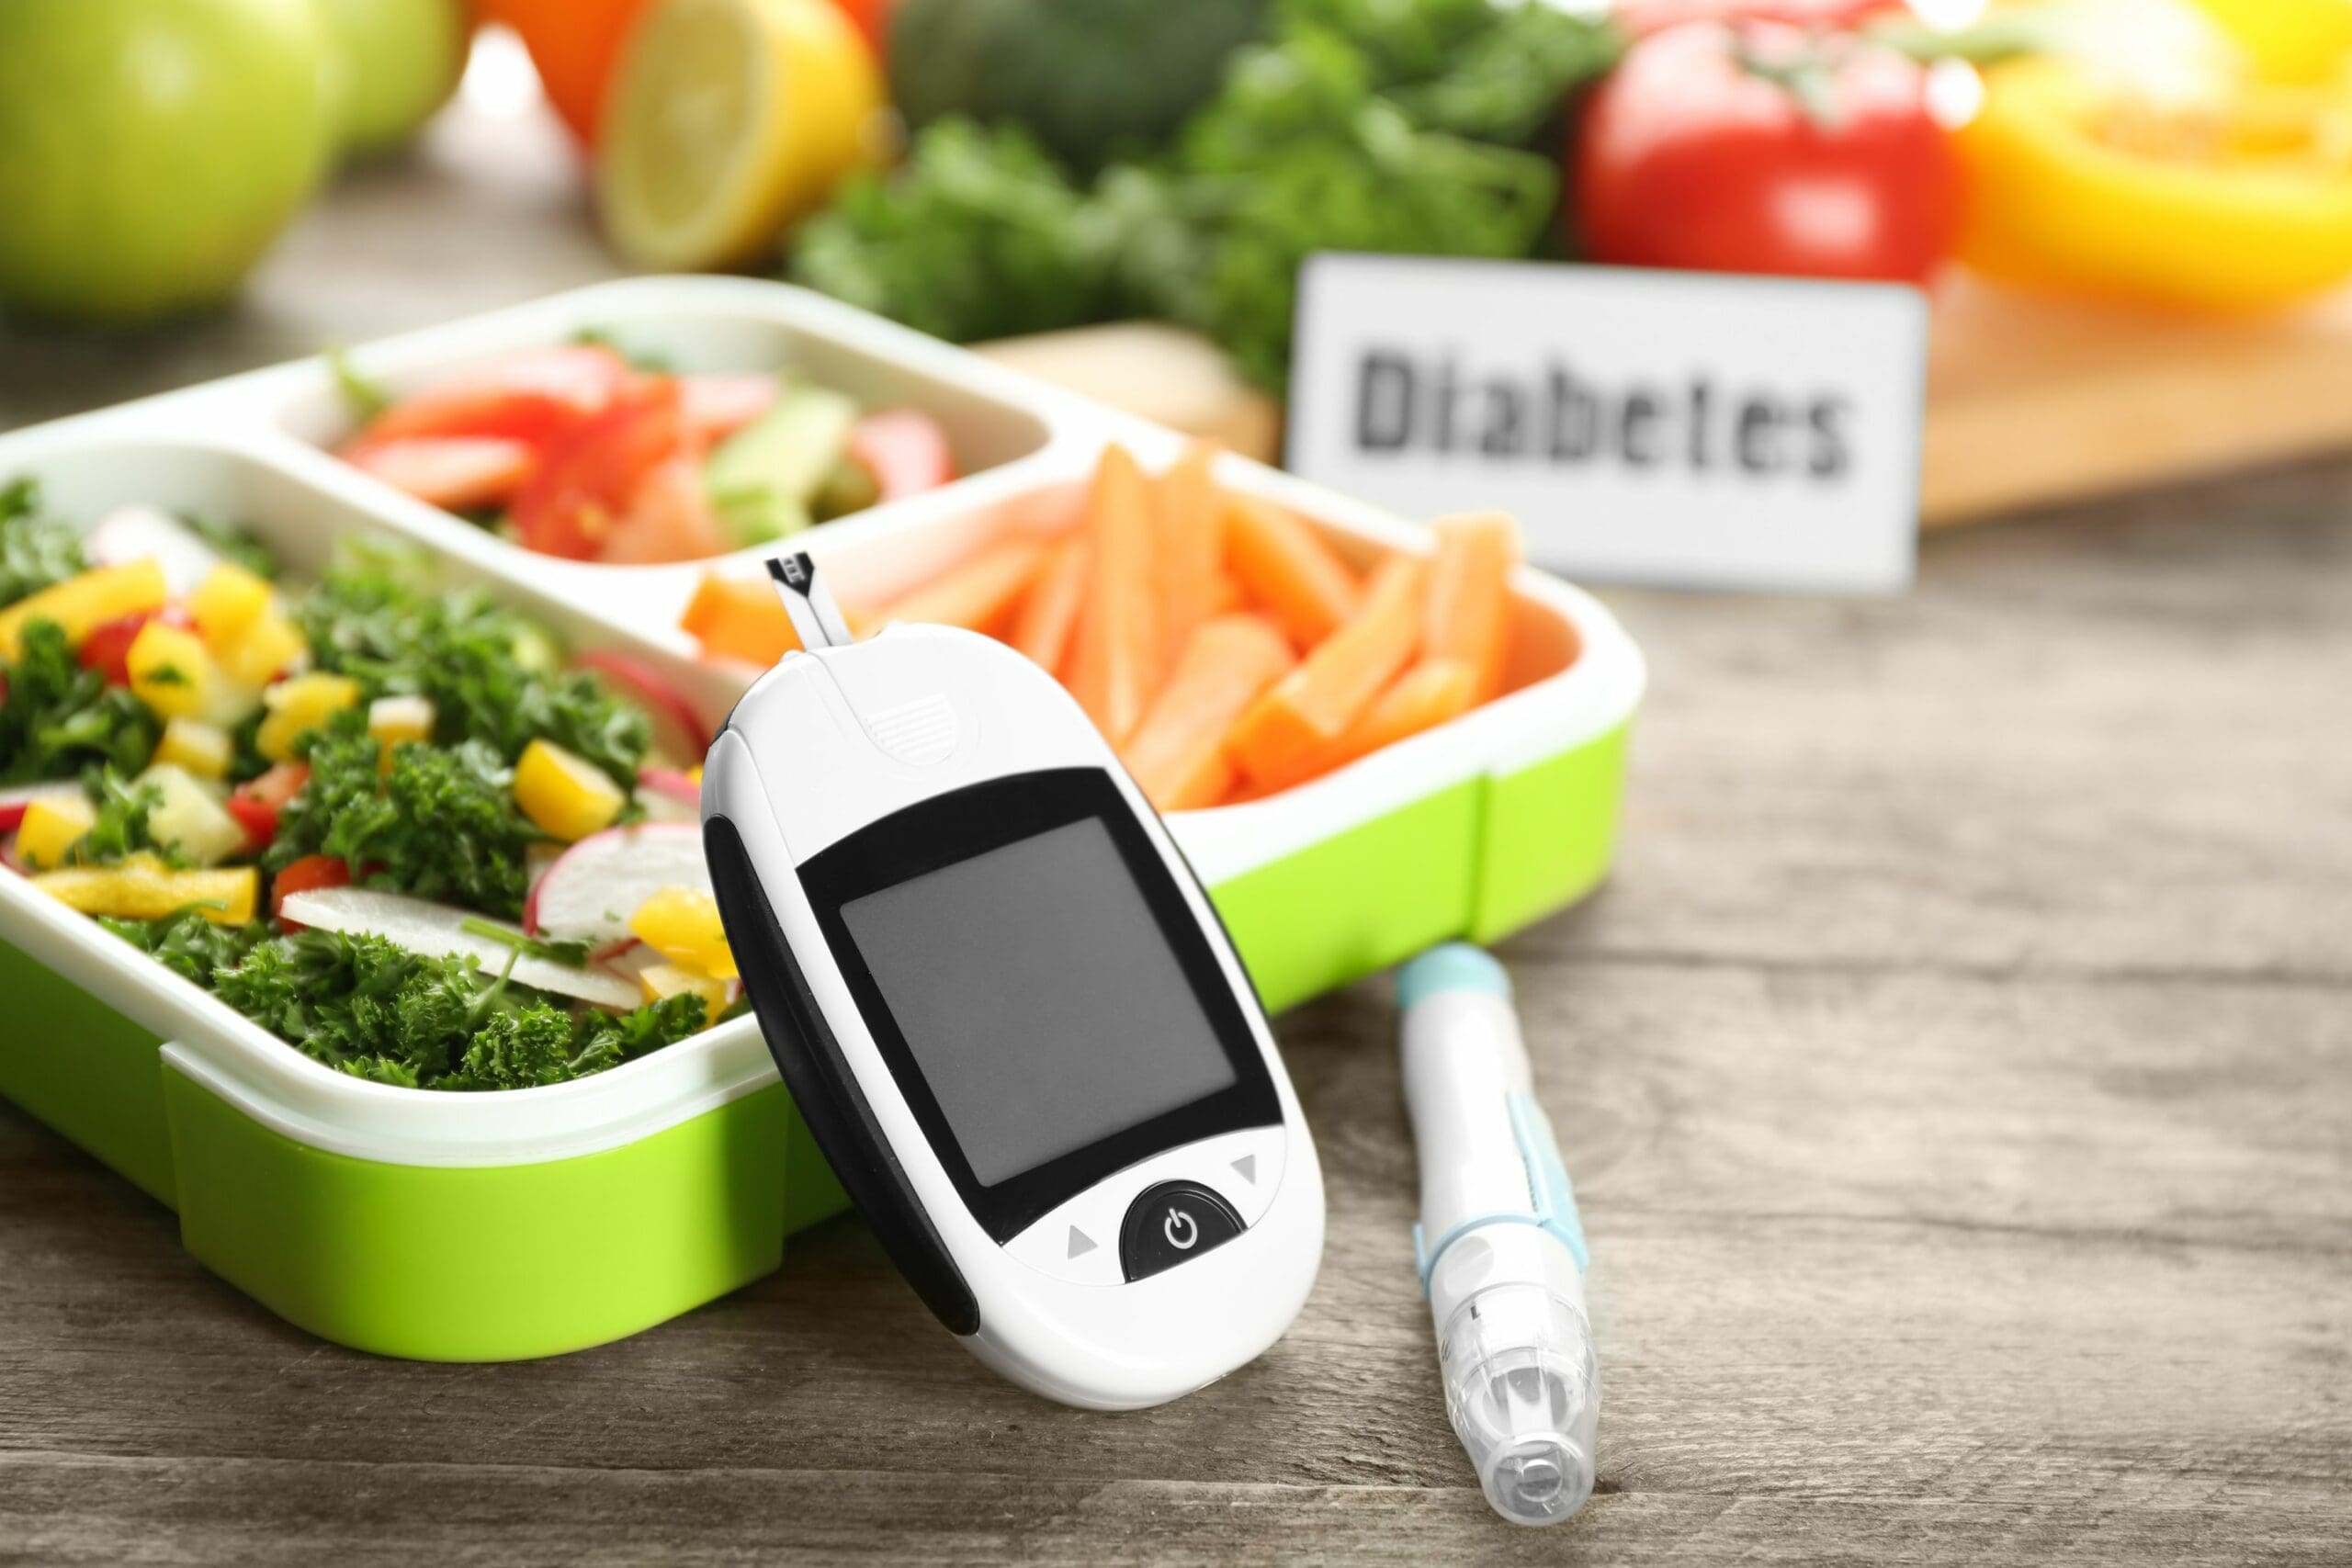 Can the order you eat your food alter blood glucose?